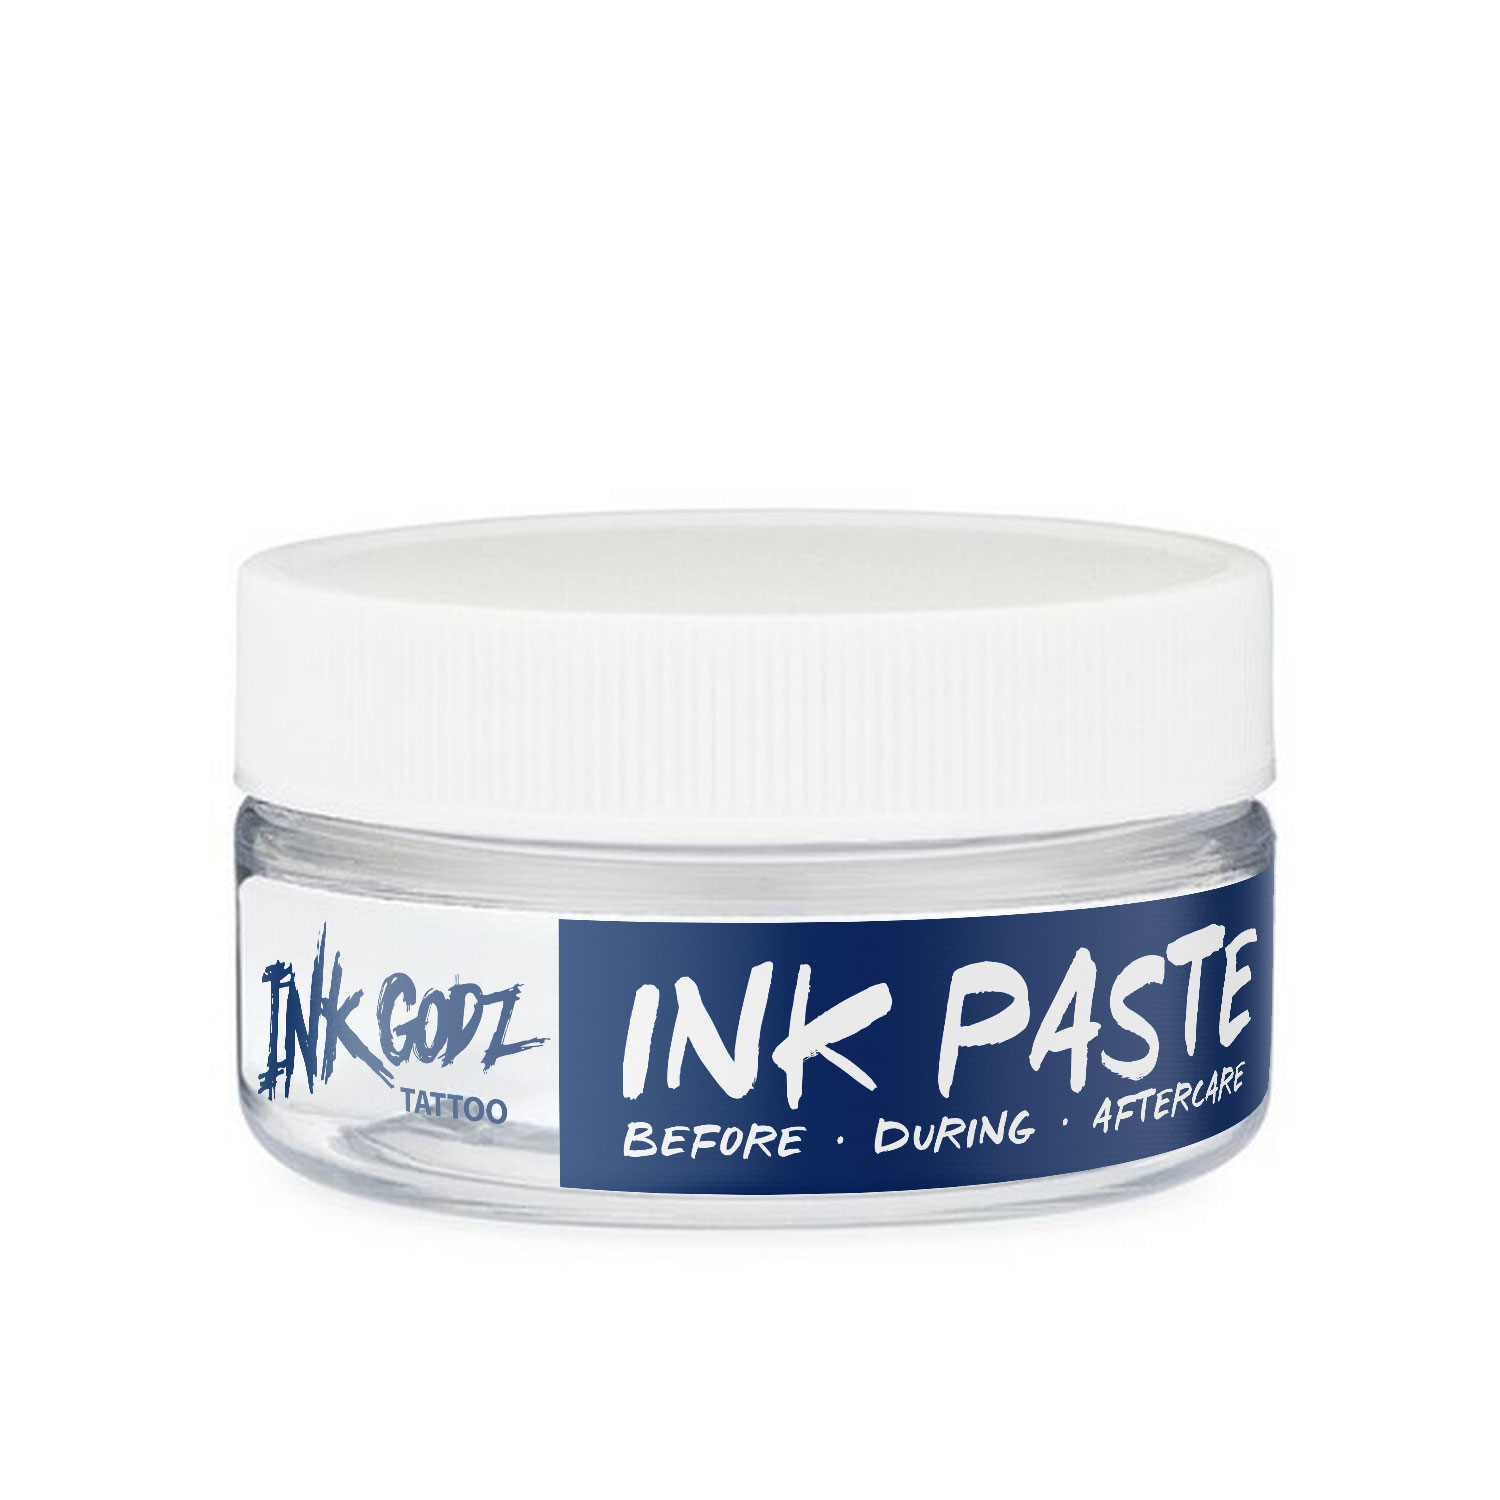 Ink Paste Tattoo Aftercare picture picture